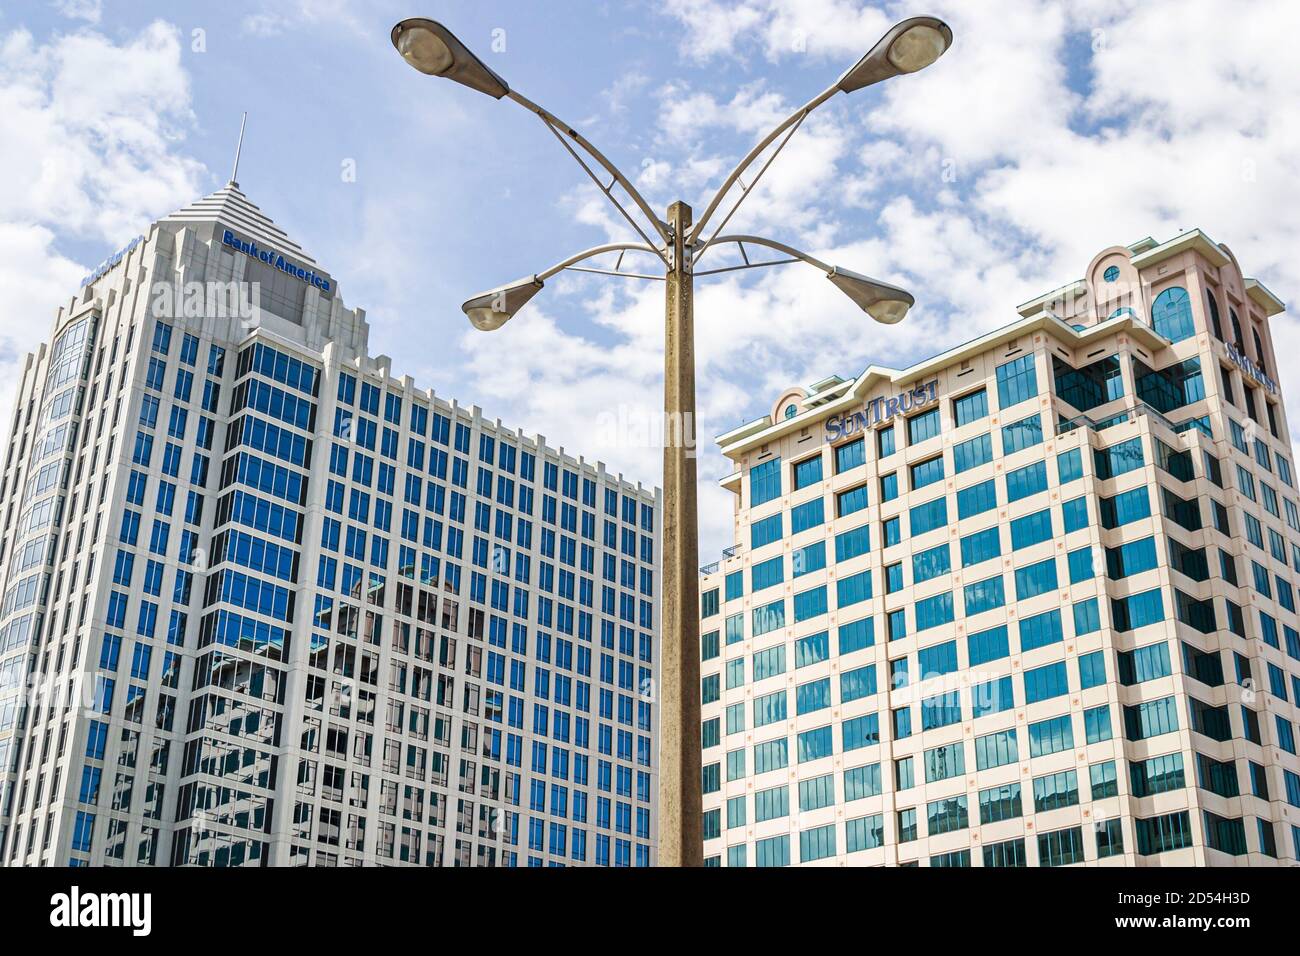 Ft. Fort Lauderdale Florida,light pole lamppost lamp public utility,high rise skyscraper skyscrapers building buildings office residential Stock Photo